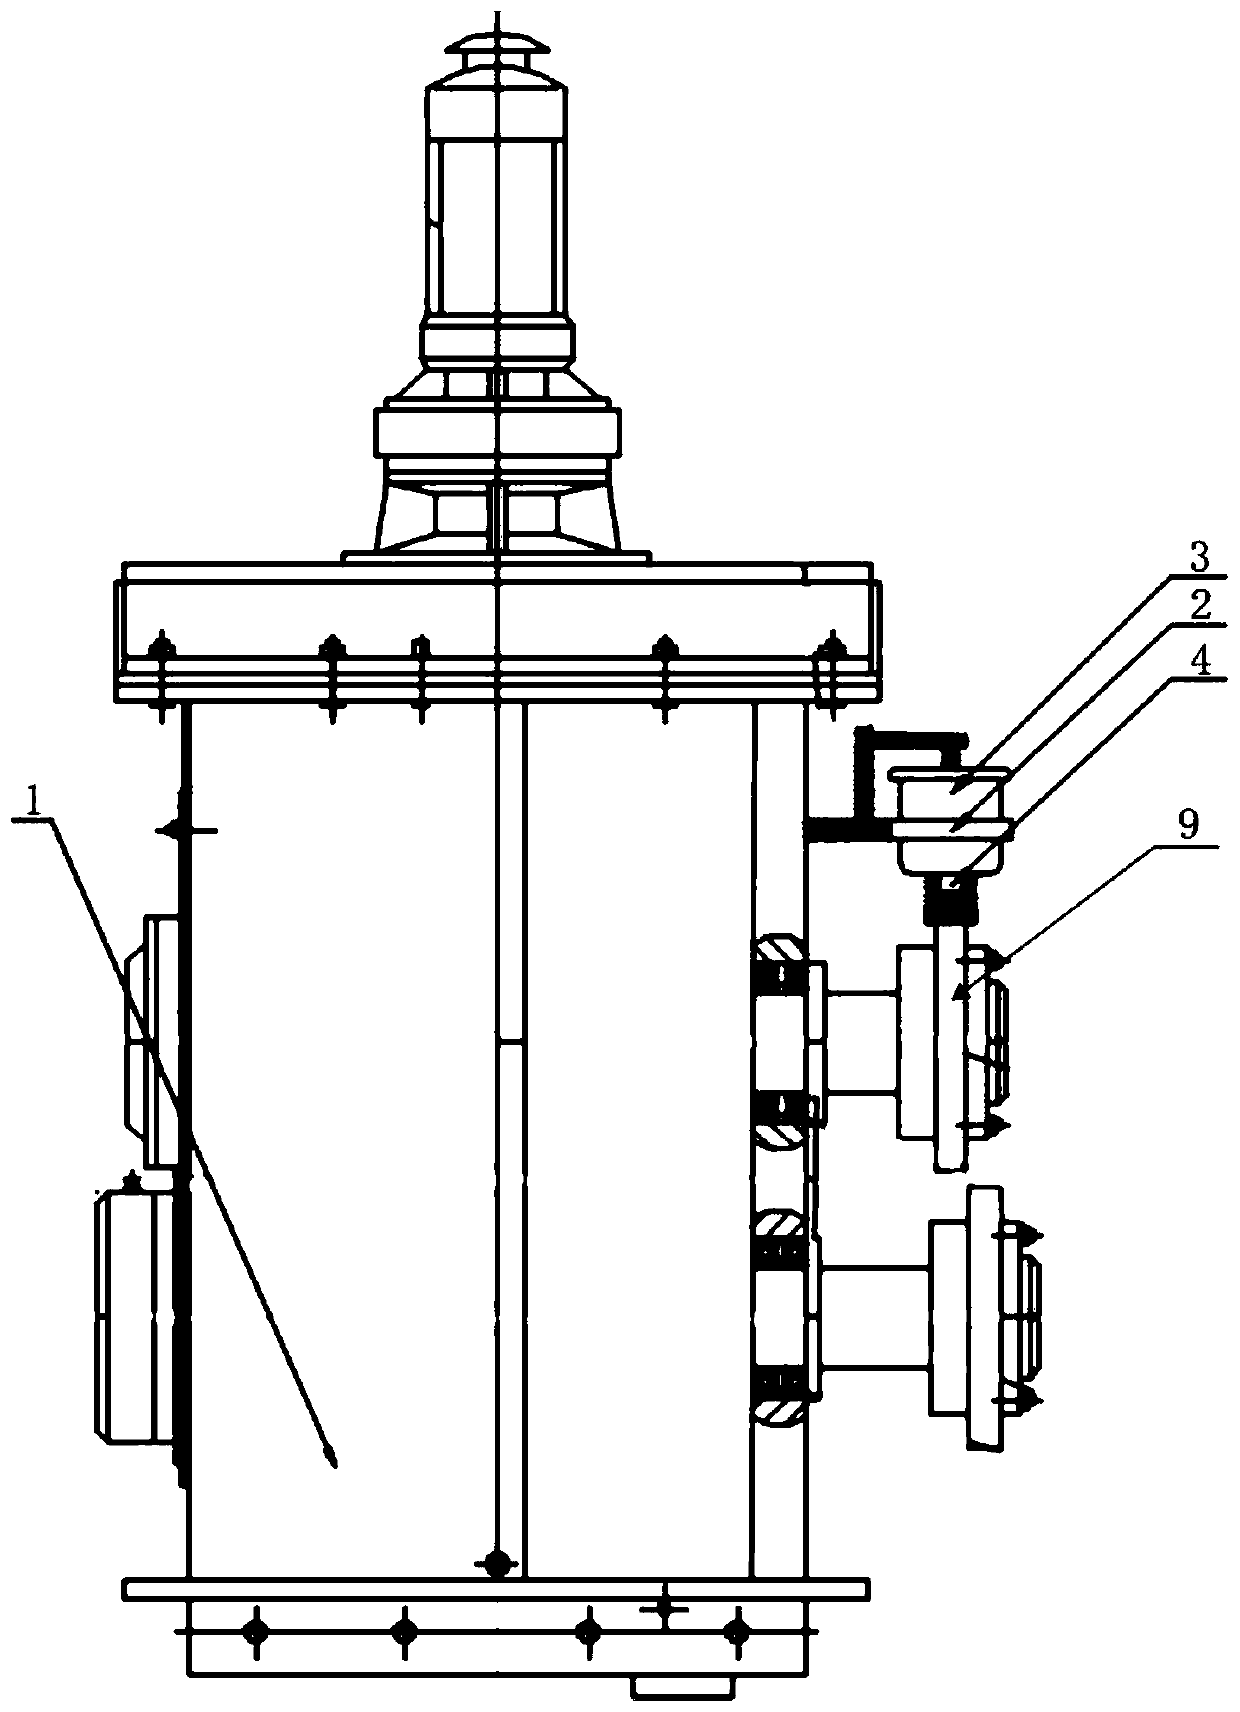 A lubricating device and lubricating method for edge trimming disc shears